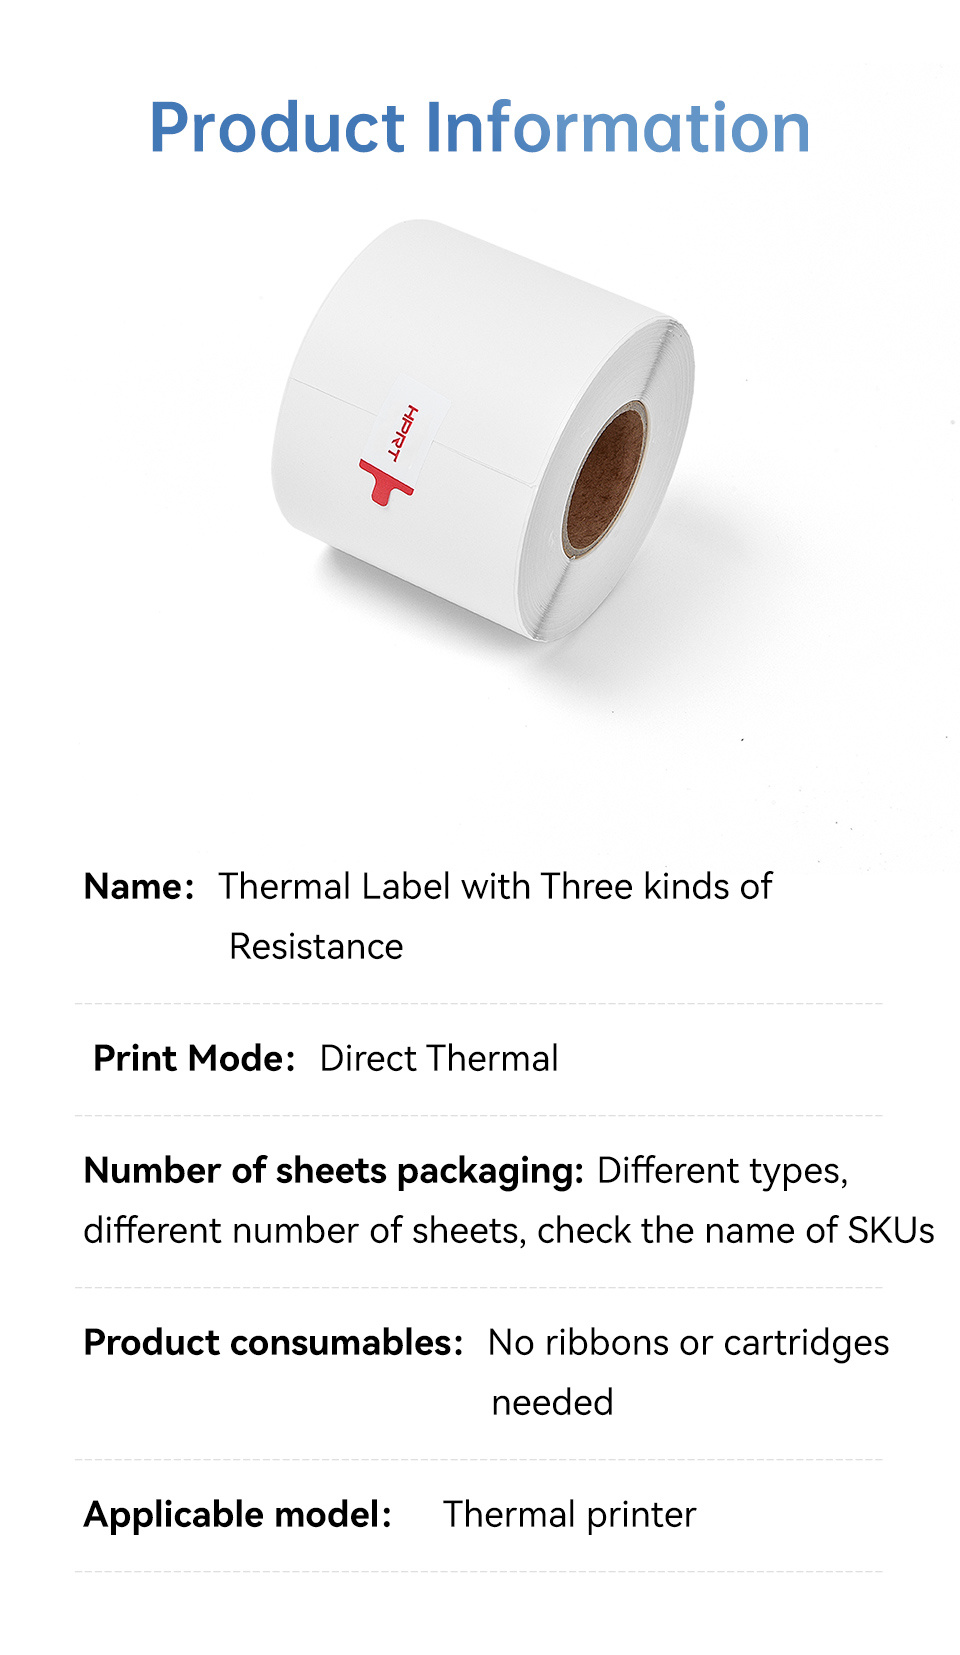 multifunctional self adhesive label paper shipping label mailing label supermarket label commercial grade label printing paper white compatible with thermal label printer waterproof oil proof details 1